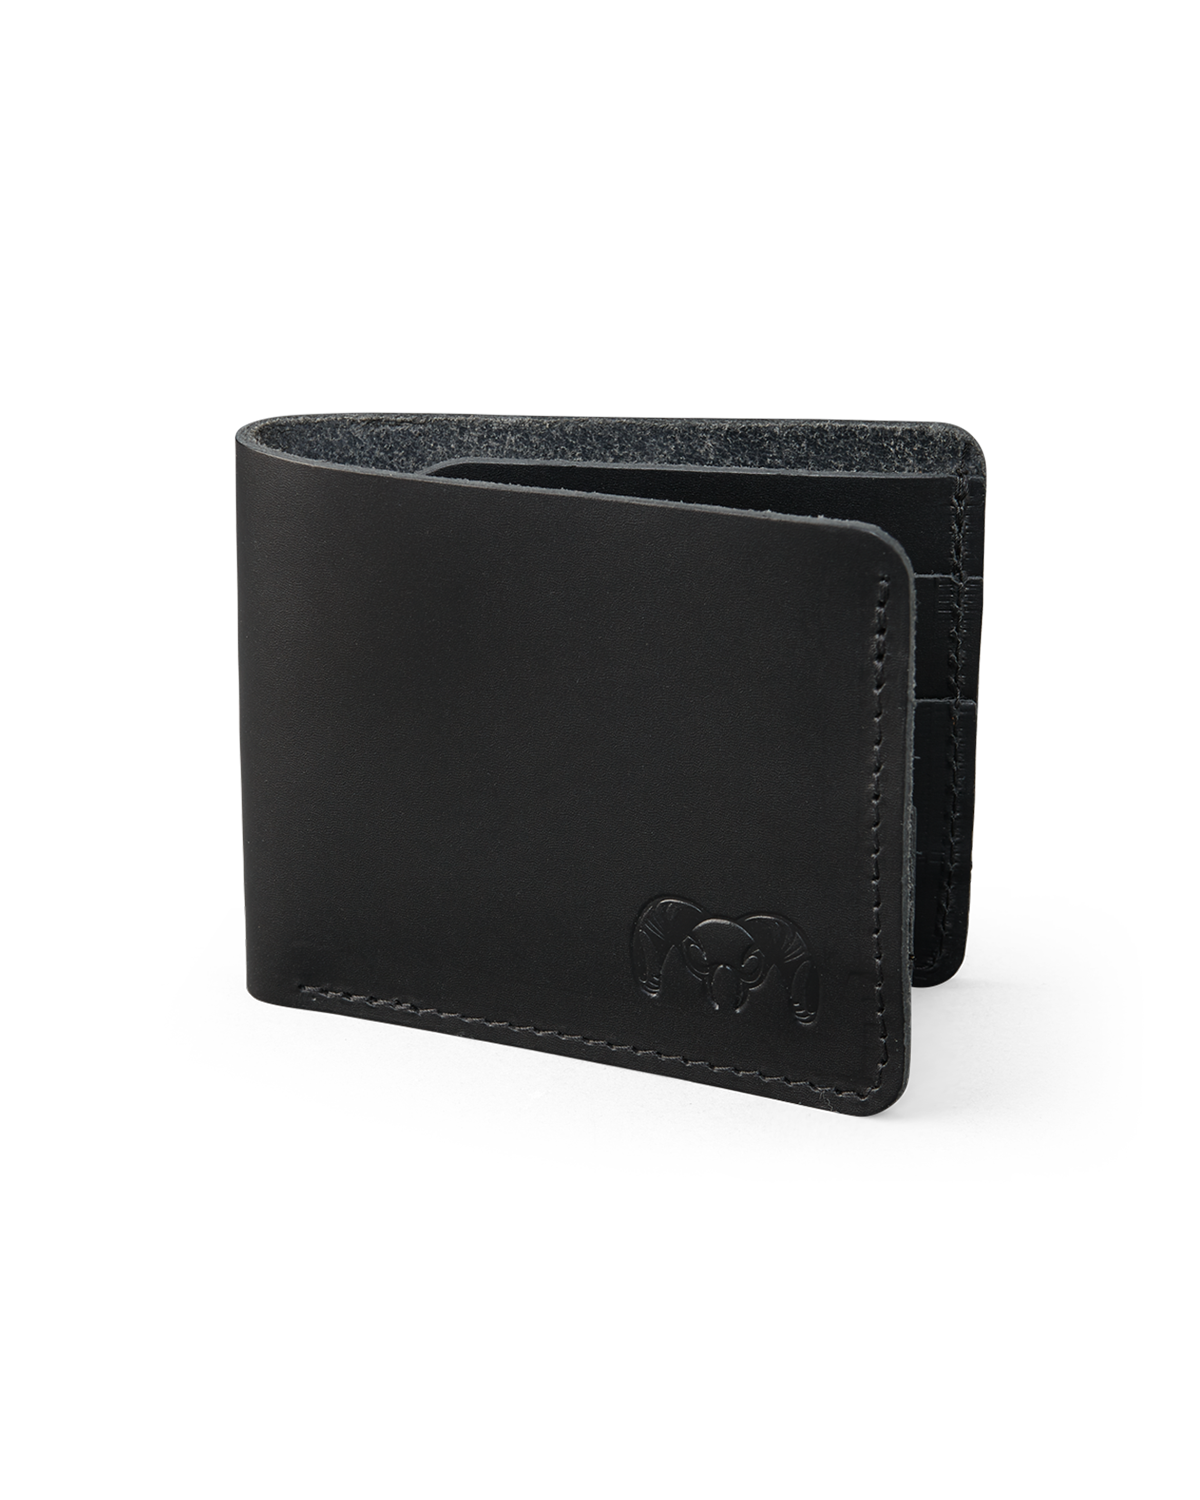 KUIU Outlet Leather Bifold Wallet in Black